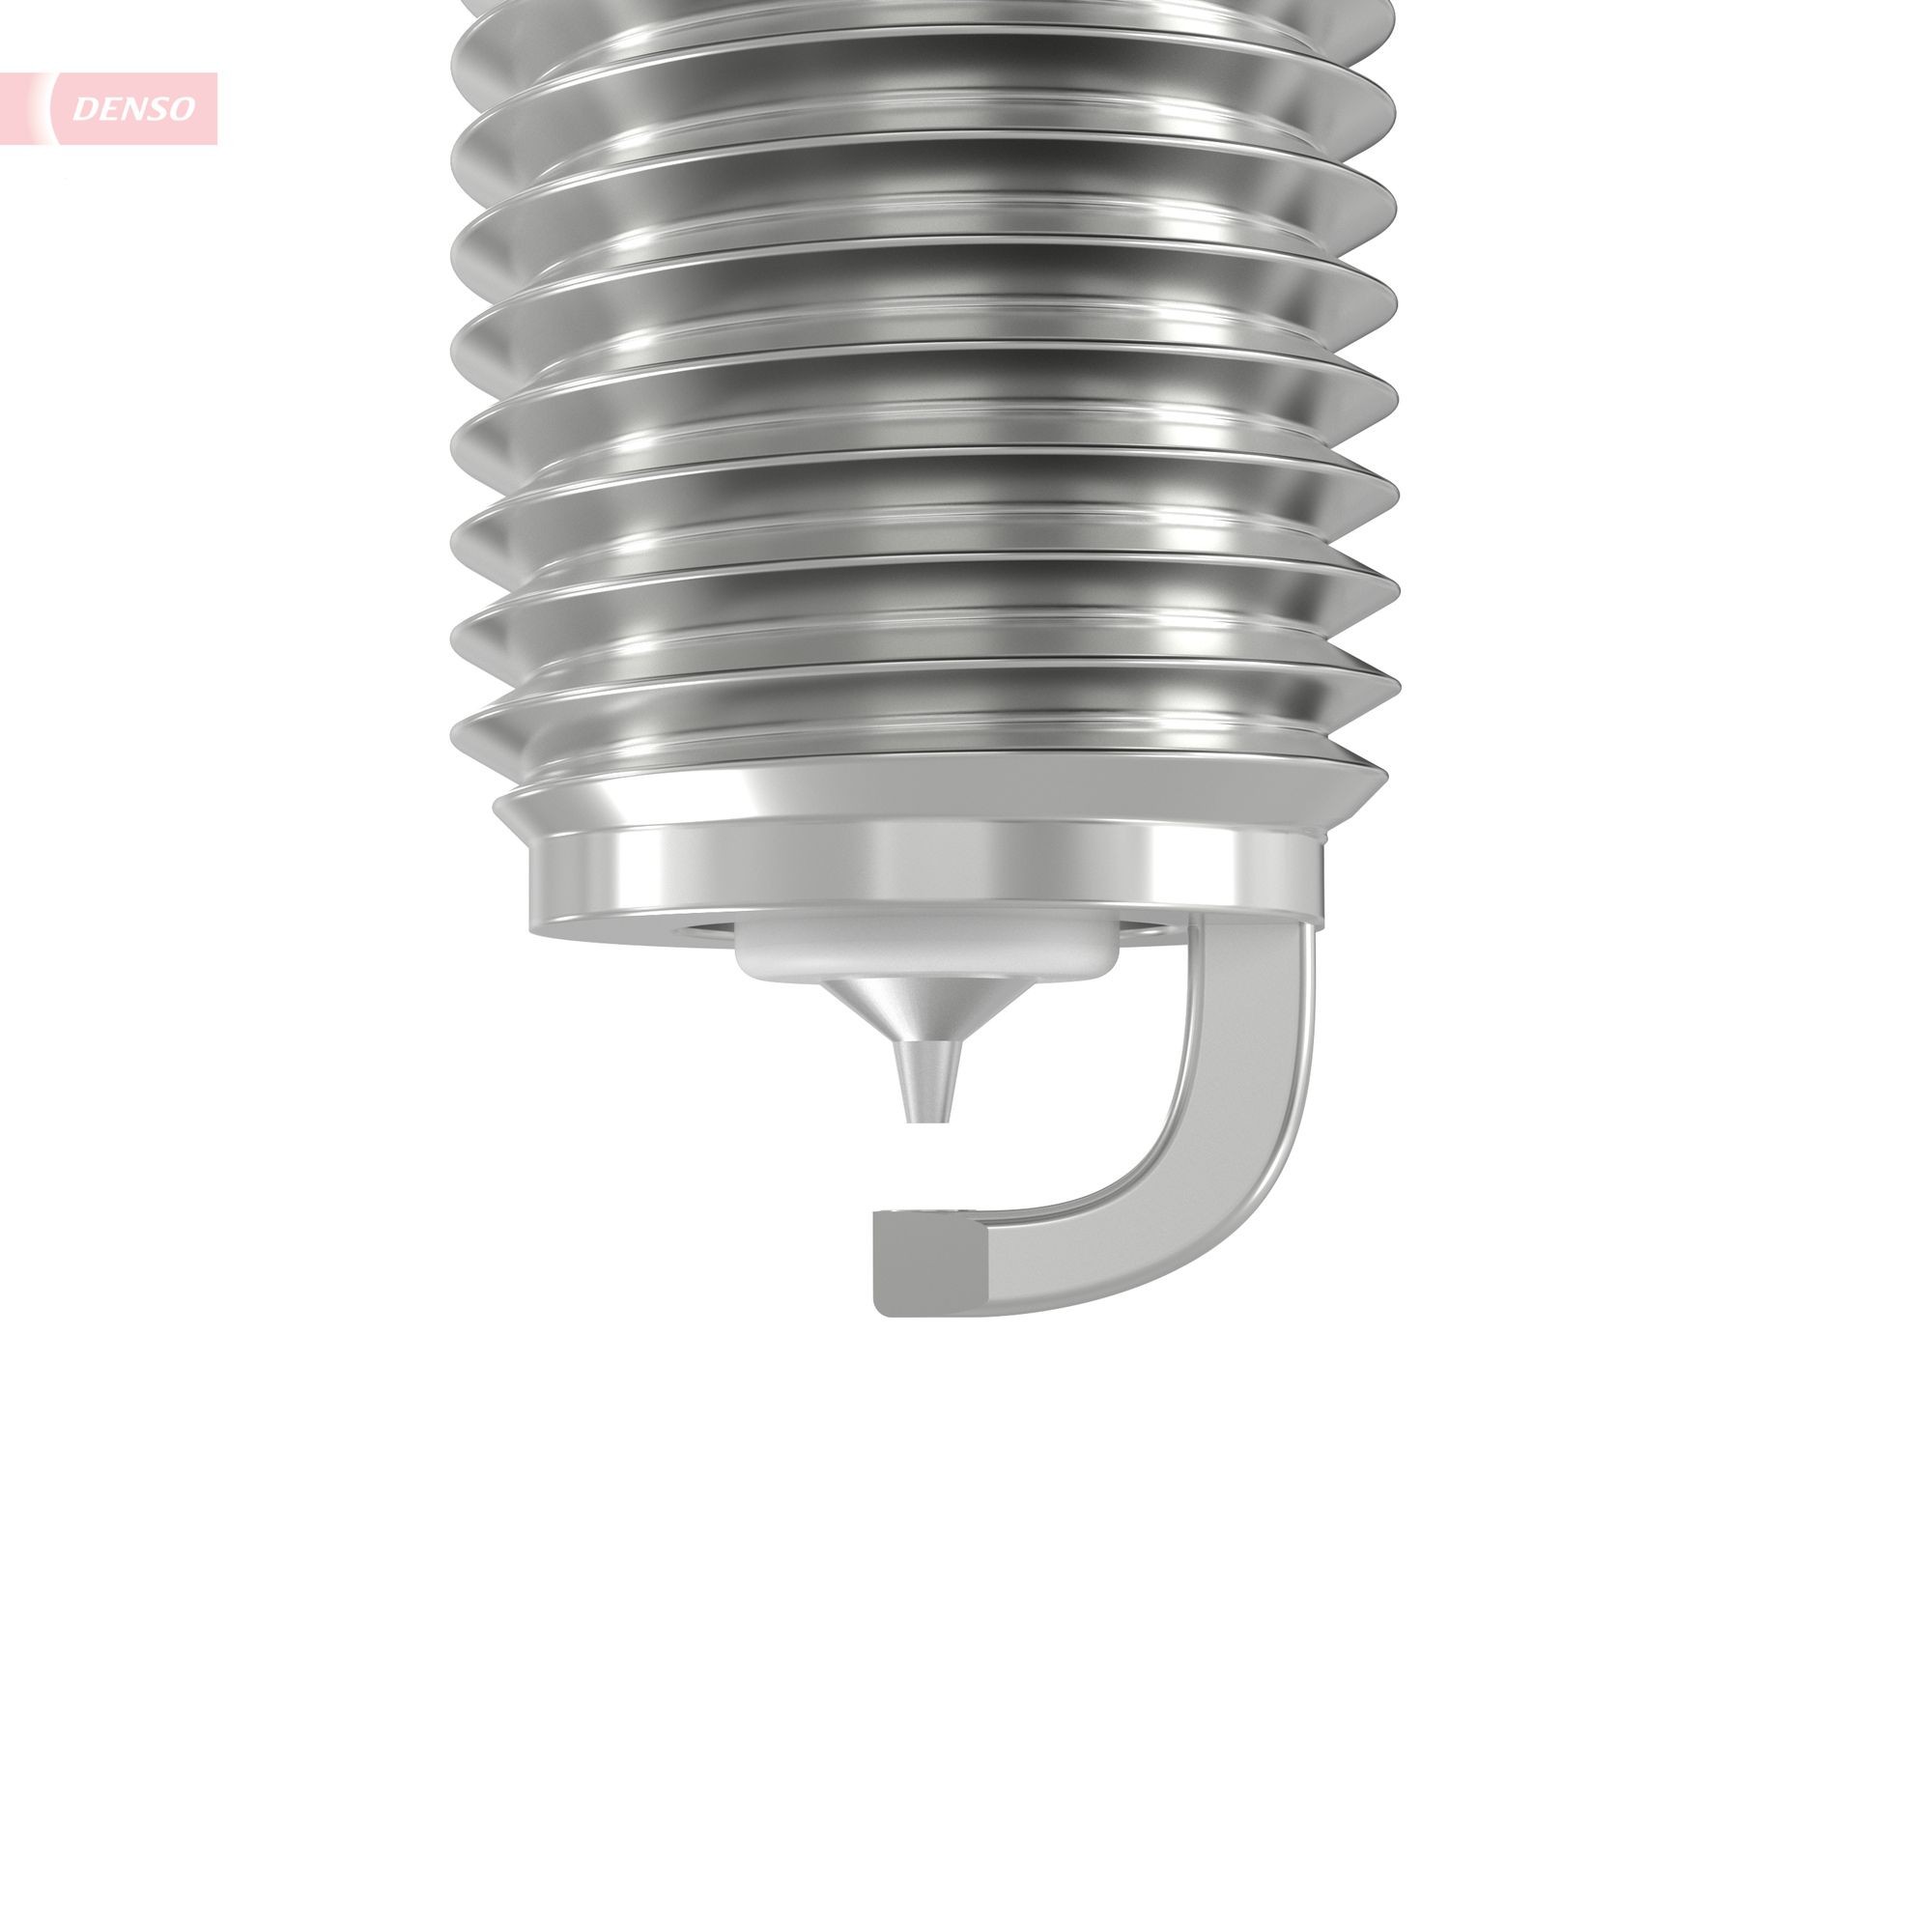 DENSO Spark plugs 5403 buy online